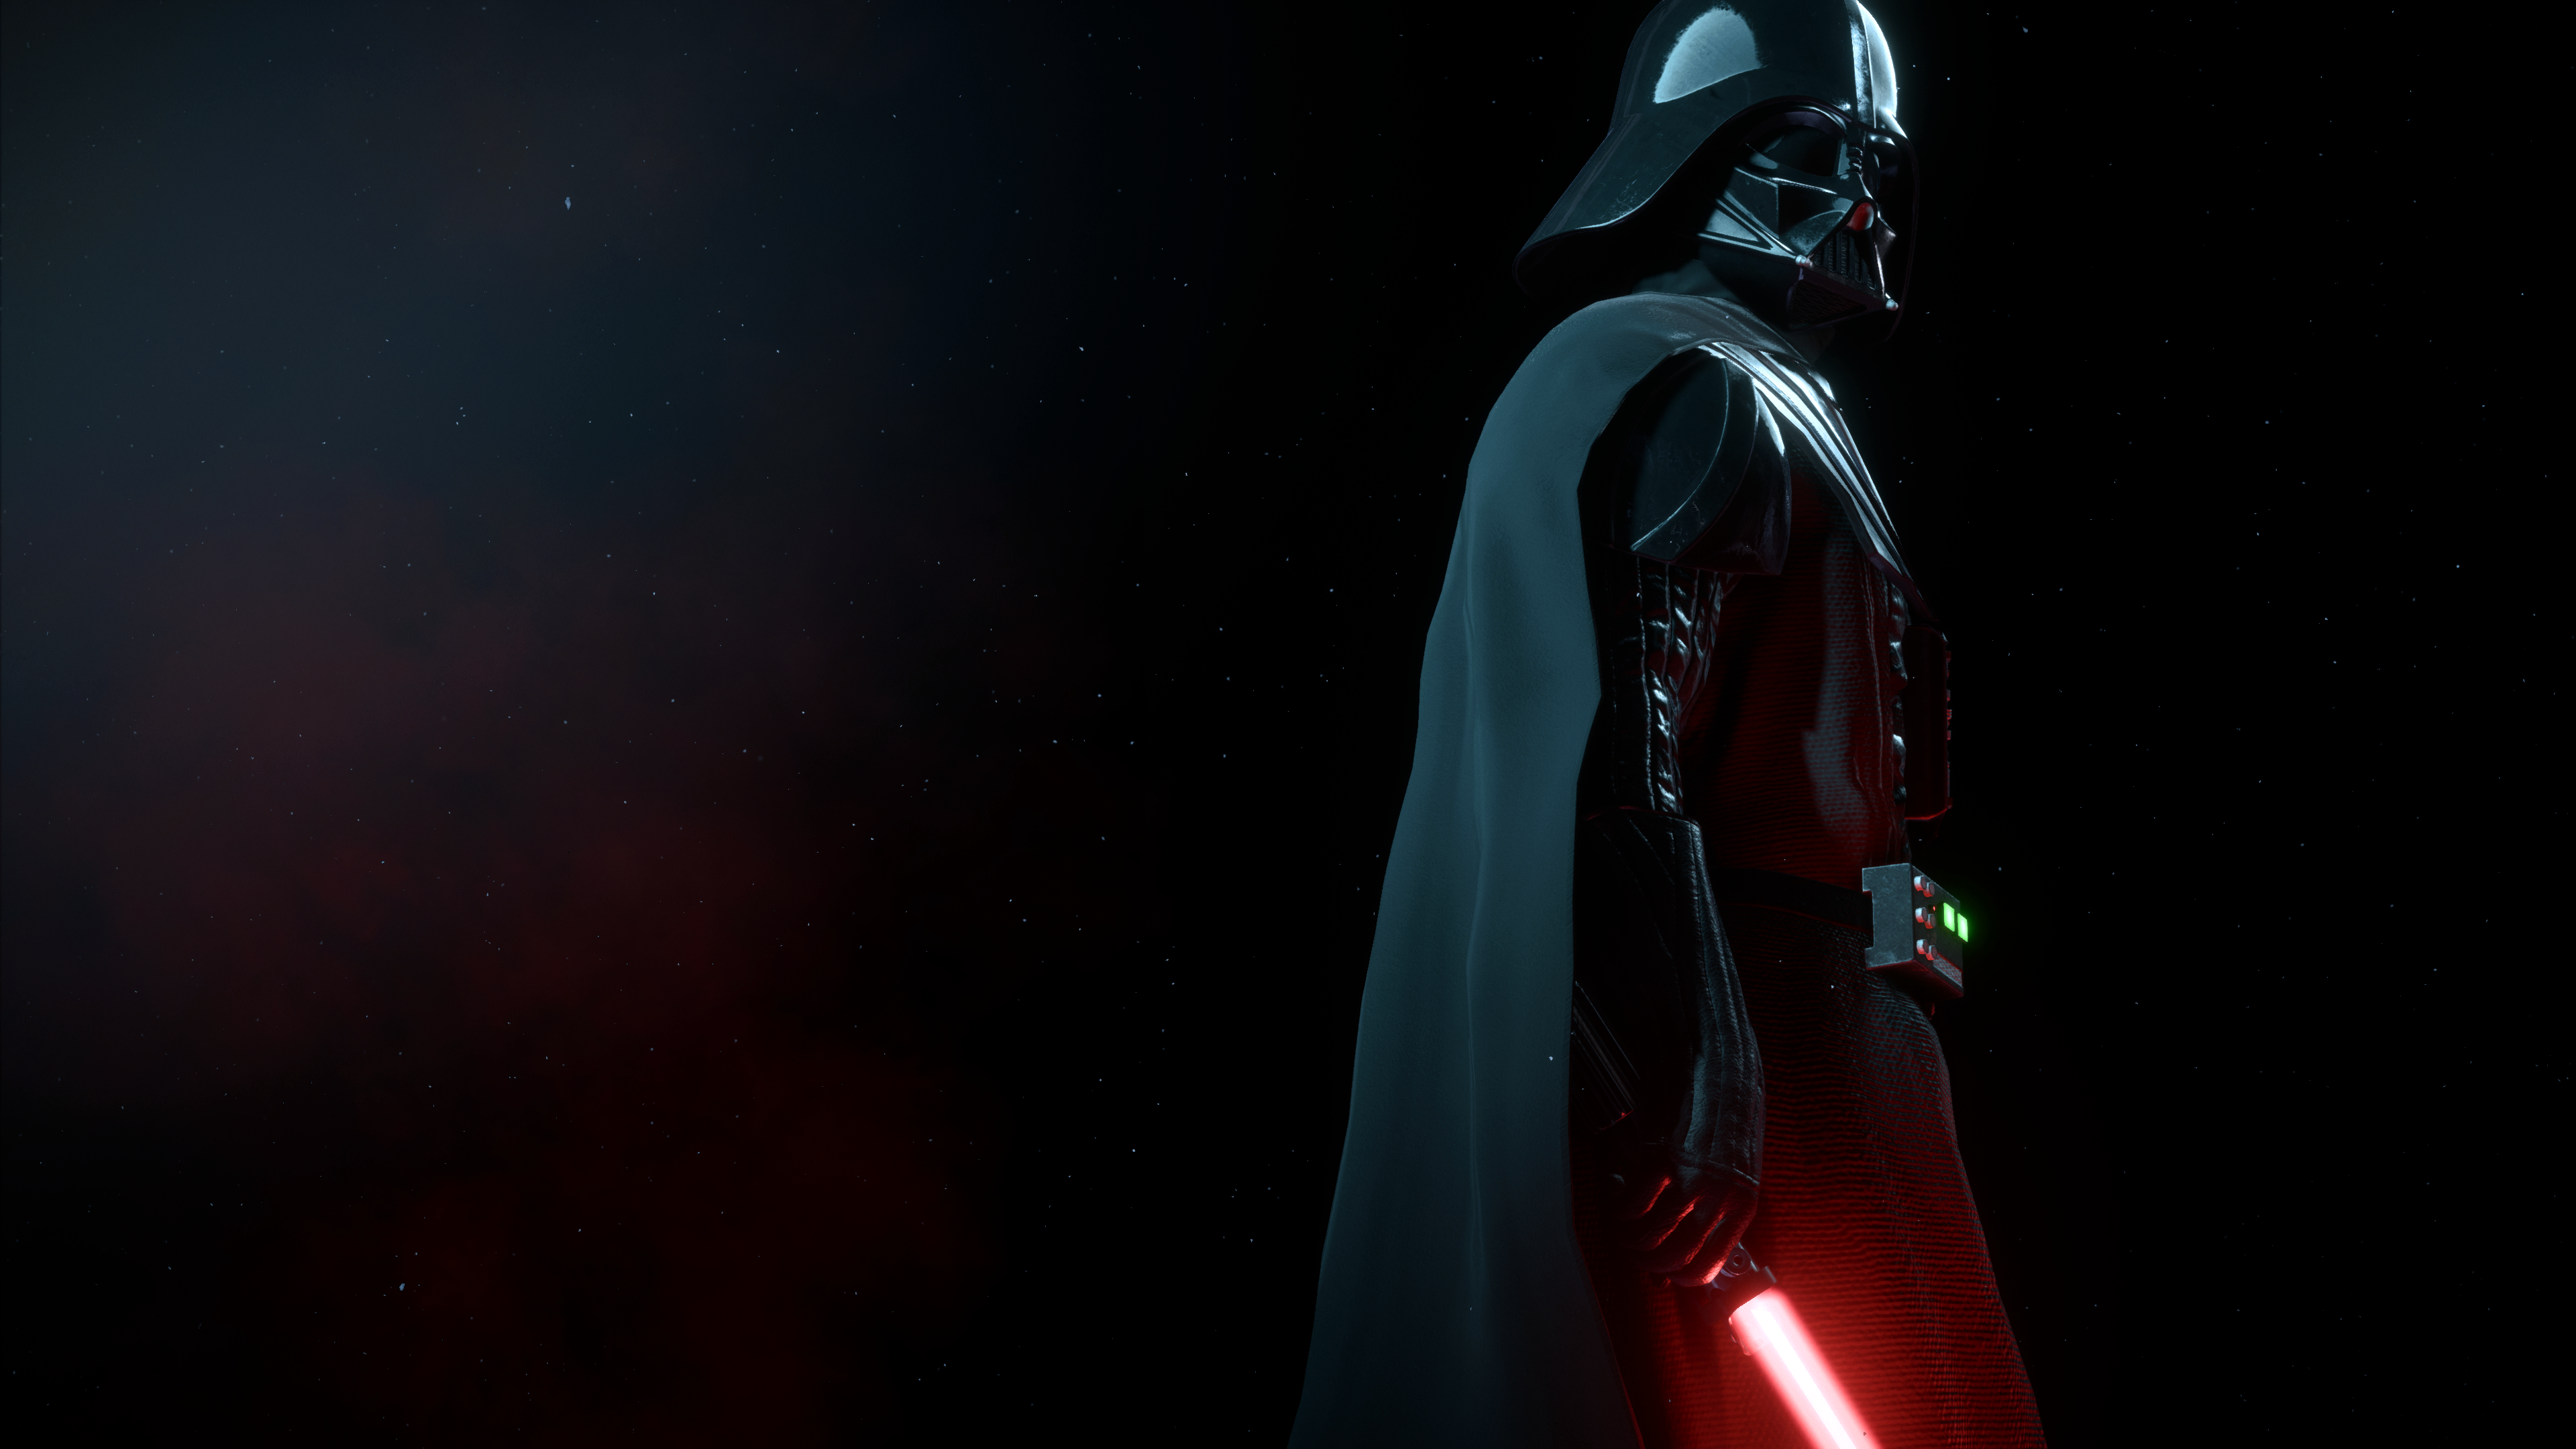 Star Wars Battlefront Characters Wallpapers - Wallpaper Cave